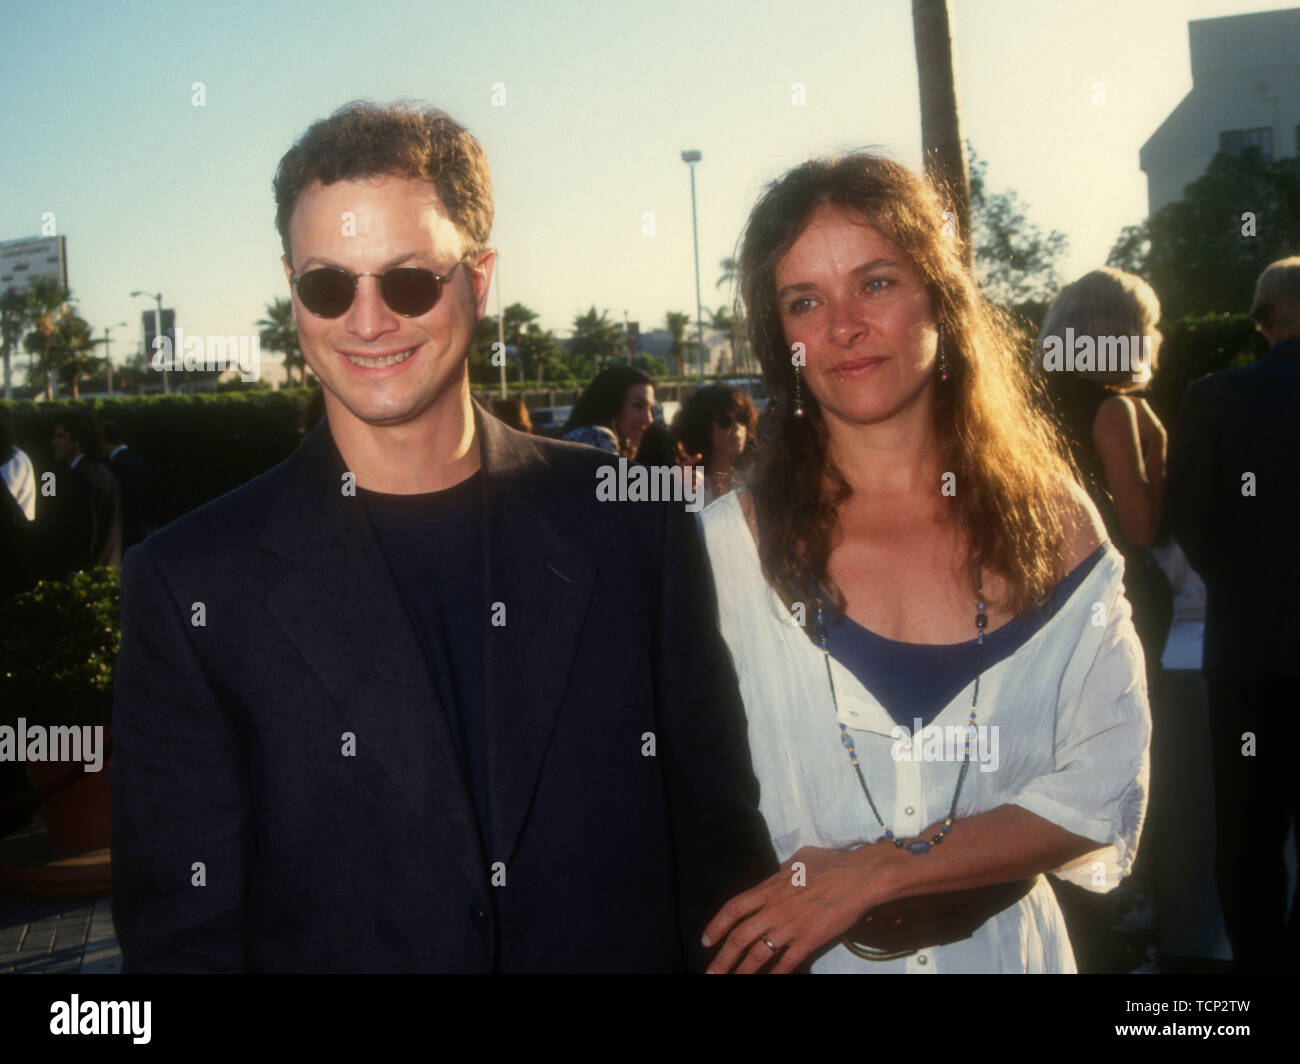 Hollywood, California, USA 23rd June 1994 Actor Gary Sinise and wife actress Moira Harris attend Paramount Pictures 'Forrest Gump' Premiere on June 23, 1994 at Paramount Studios in Hollywood, California, USA. Photo by Barry King/Alamy Stock Photo Stock Photo